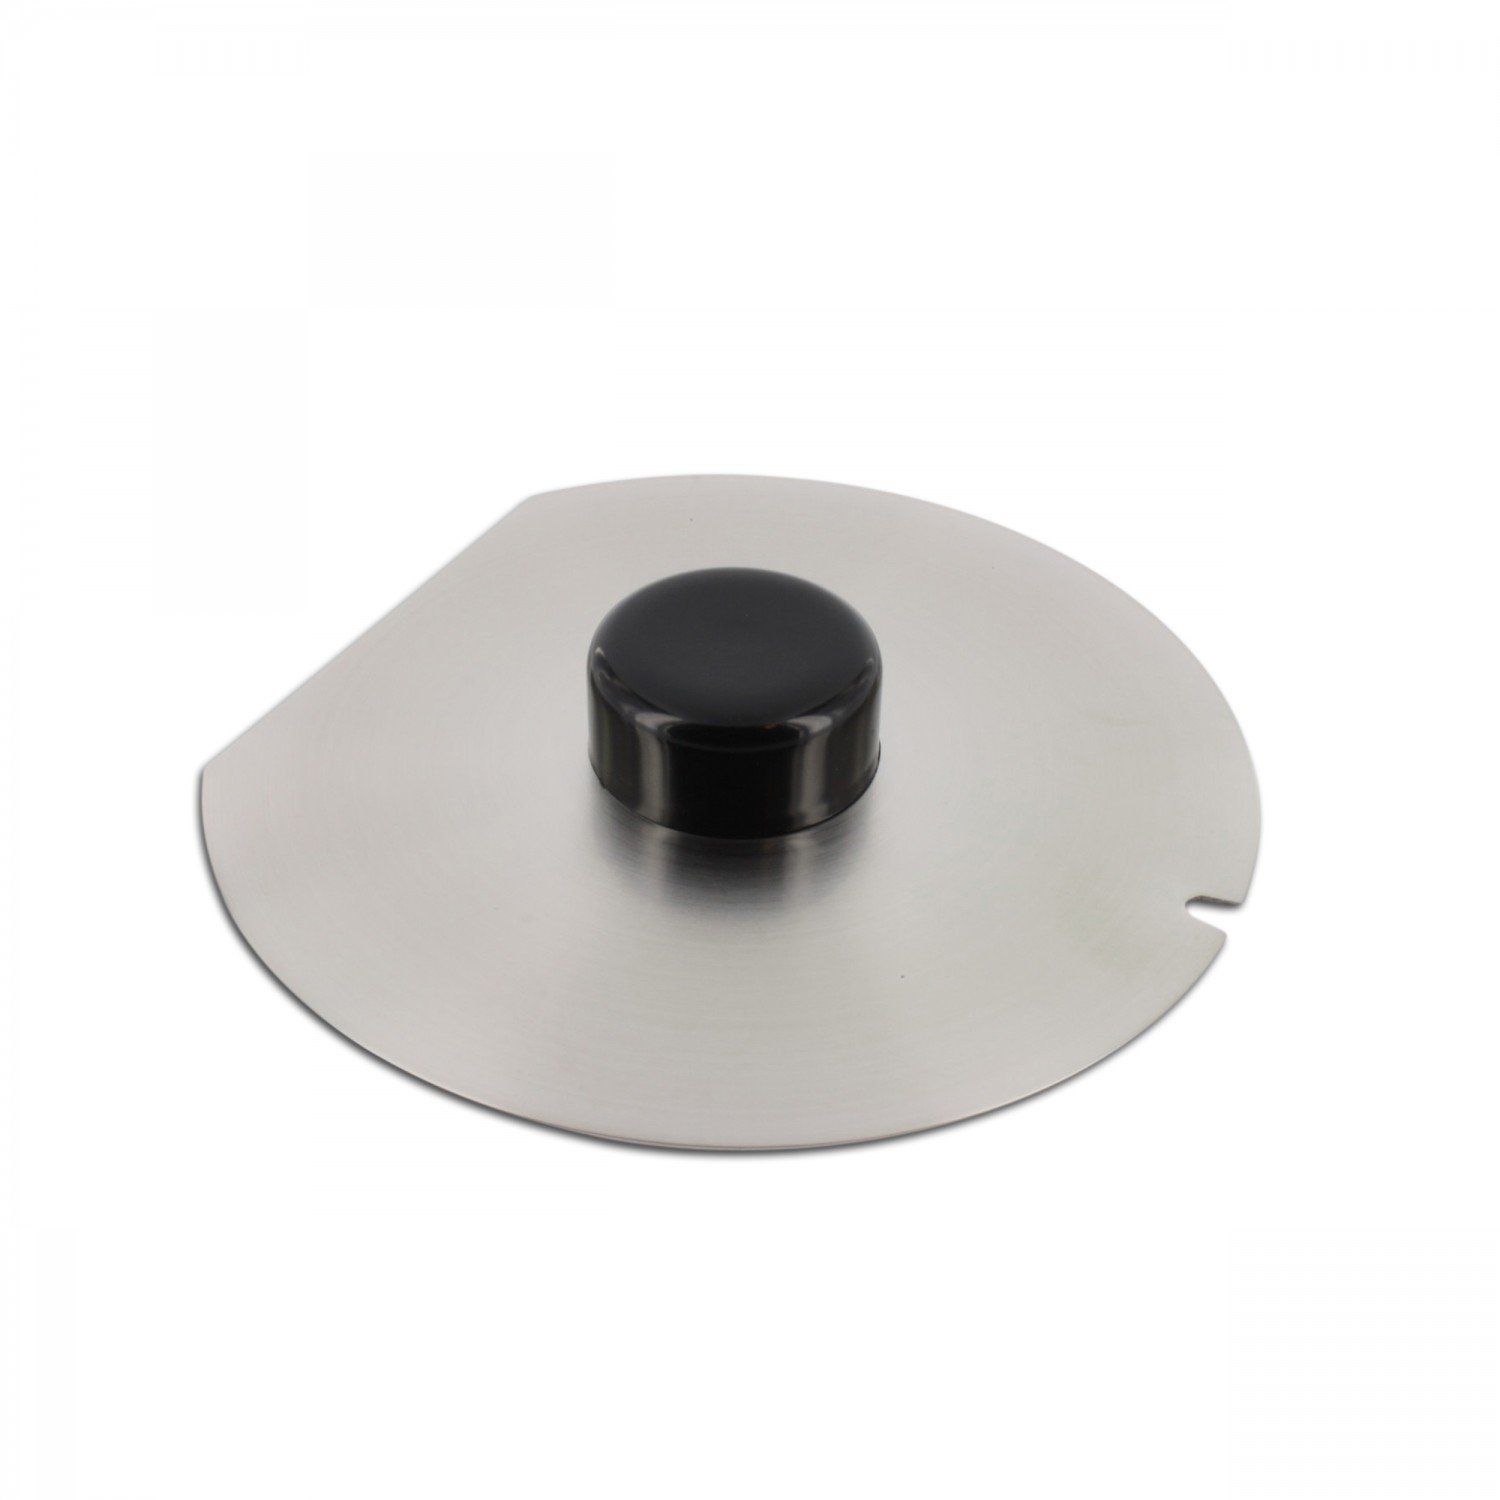 Replacement lid_10259.jpg